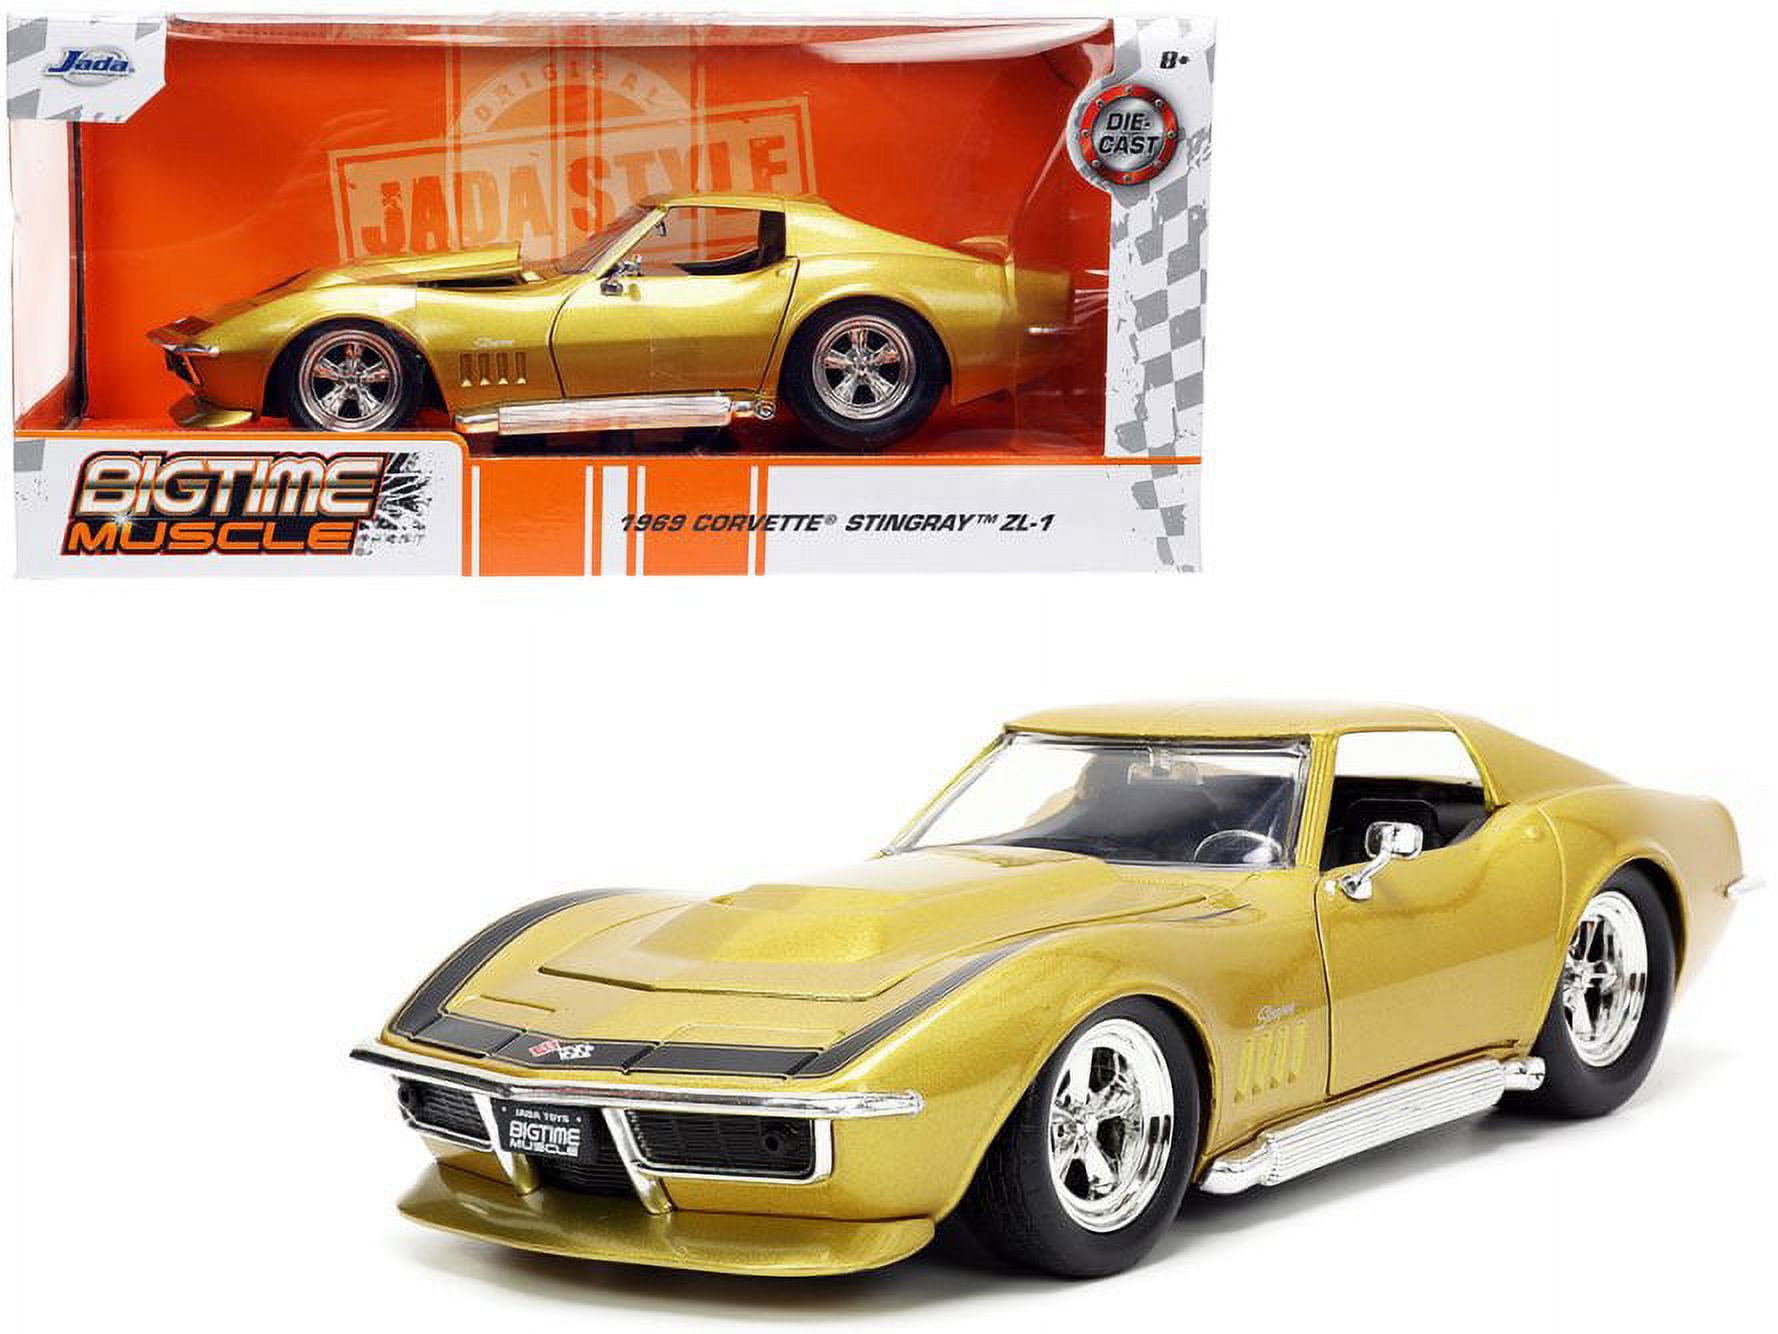 Jada Toys Big Time Muscle 1:24 1969 Chevy Corvette Stingray ZL-1 Die-cast  Car Gold, Toys for Kids and Adults